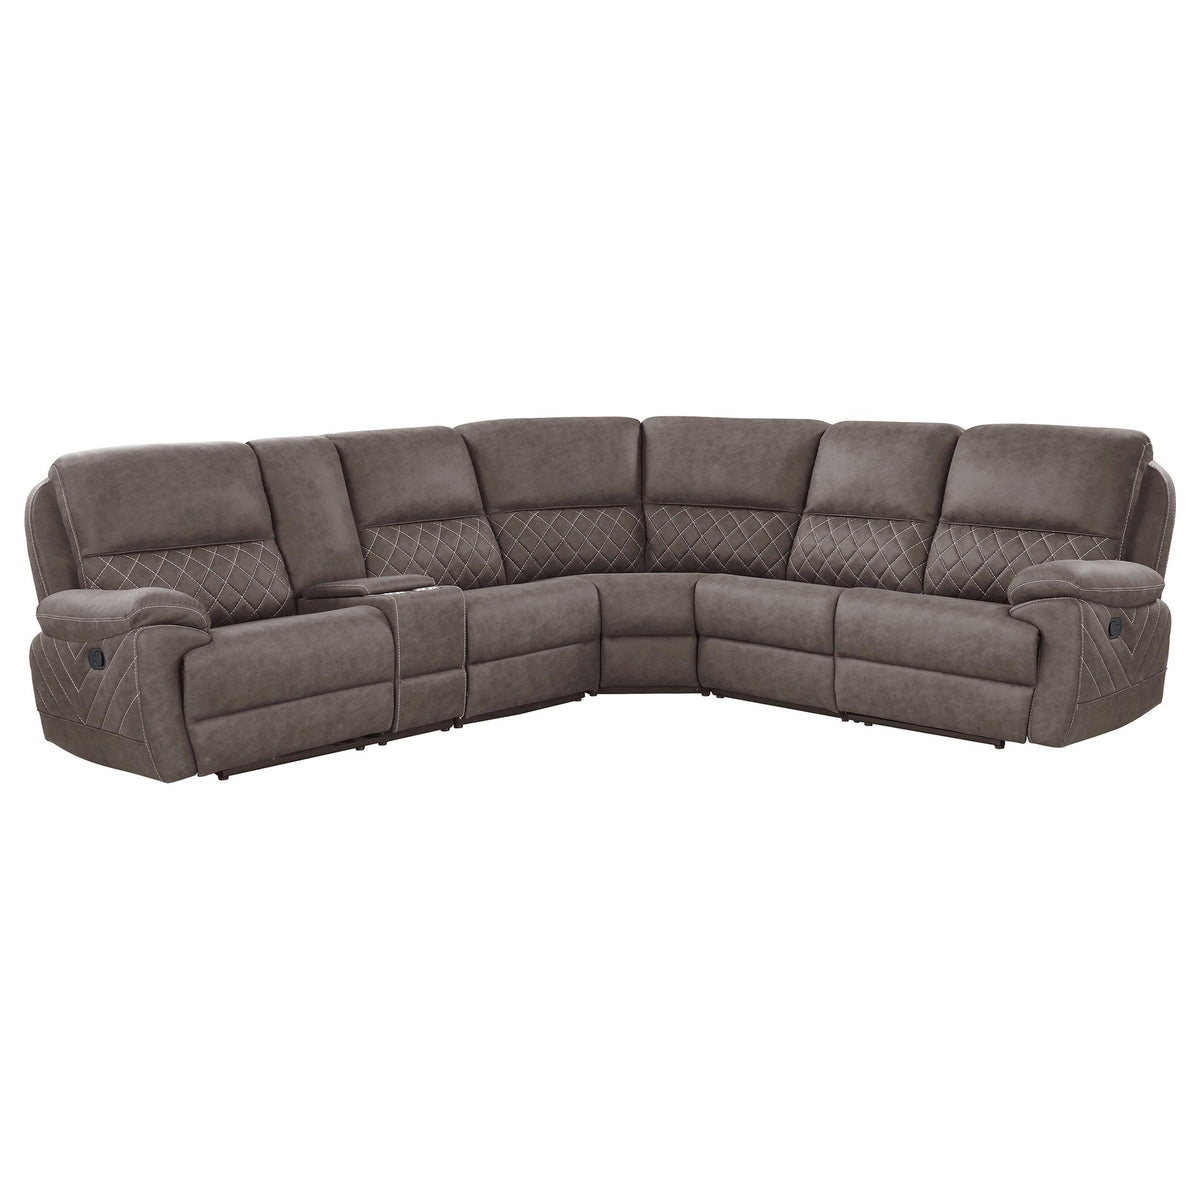 G608980 6 Pc Motion Sectional  Half Price Furniture